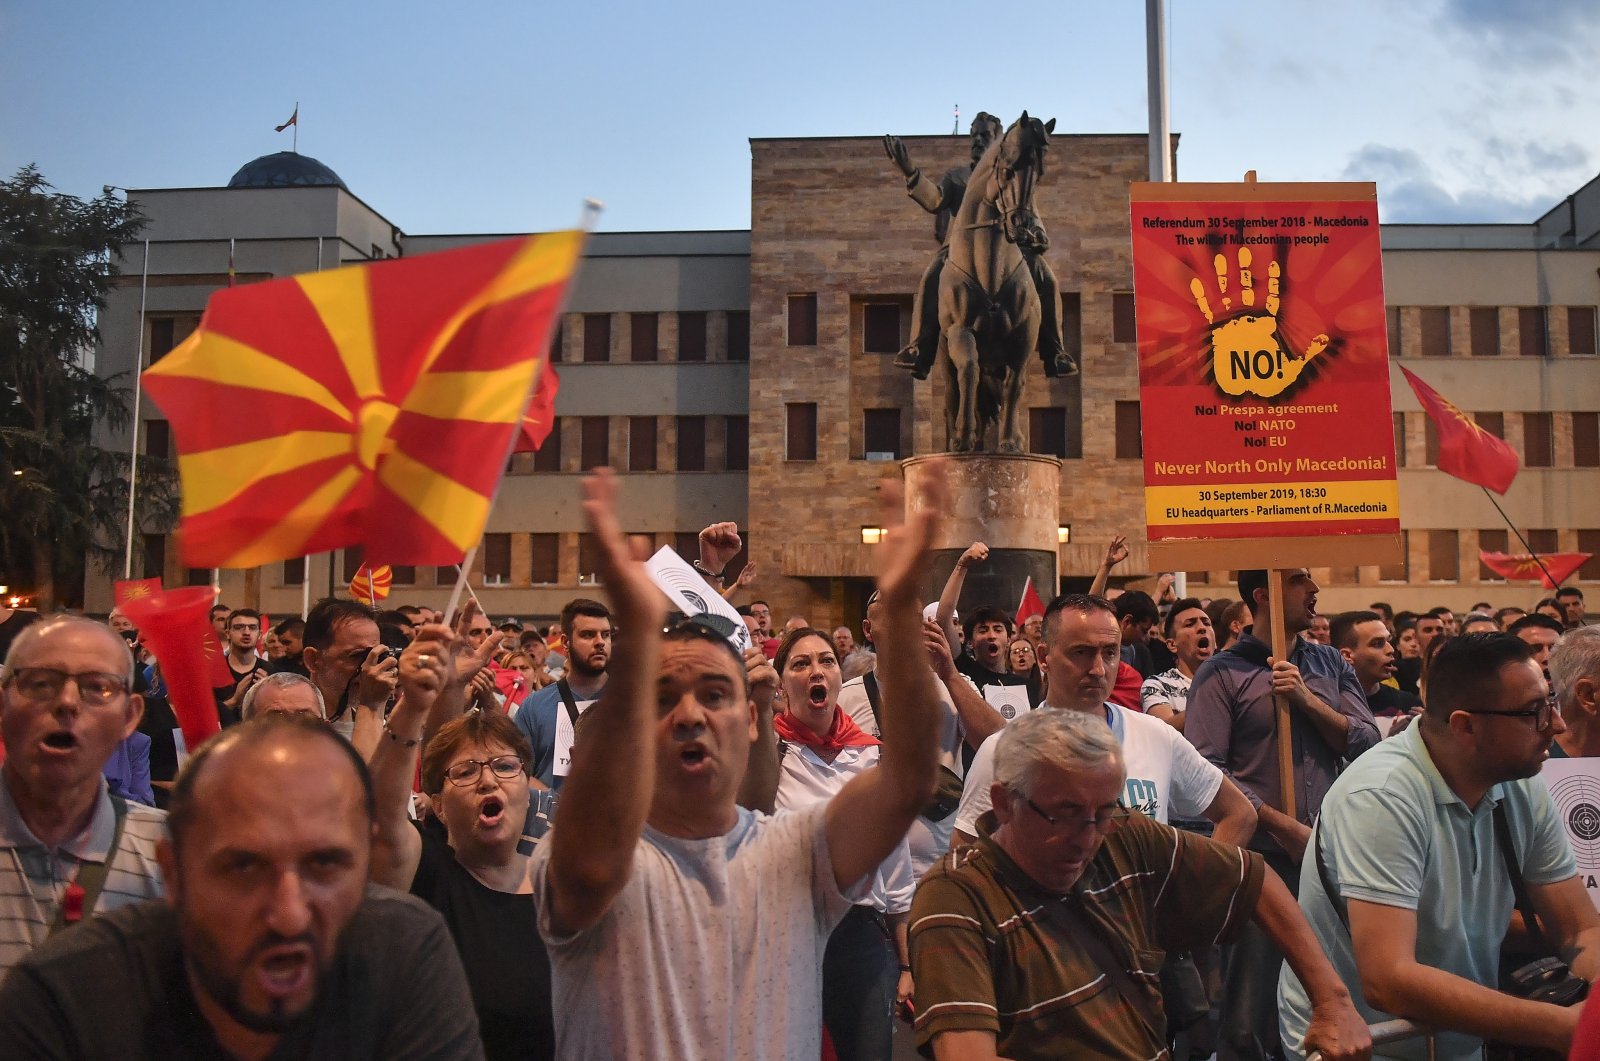 Supporters of the opposition party VMRO DPMNE and other citizens shout anti-government slogans, during a protest against the French proposal to resolve the dispute between North Macedonia and Bulgaria in front of the parliament building in Skopje, North Macedonia, July 7, 2022. (EPA Photo)